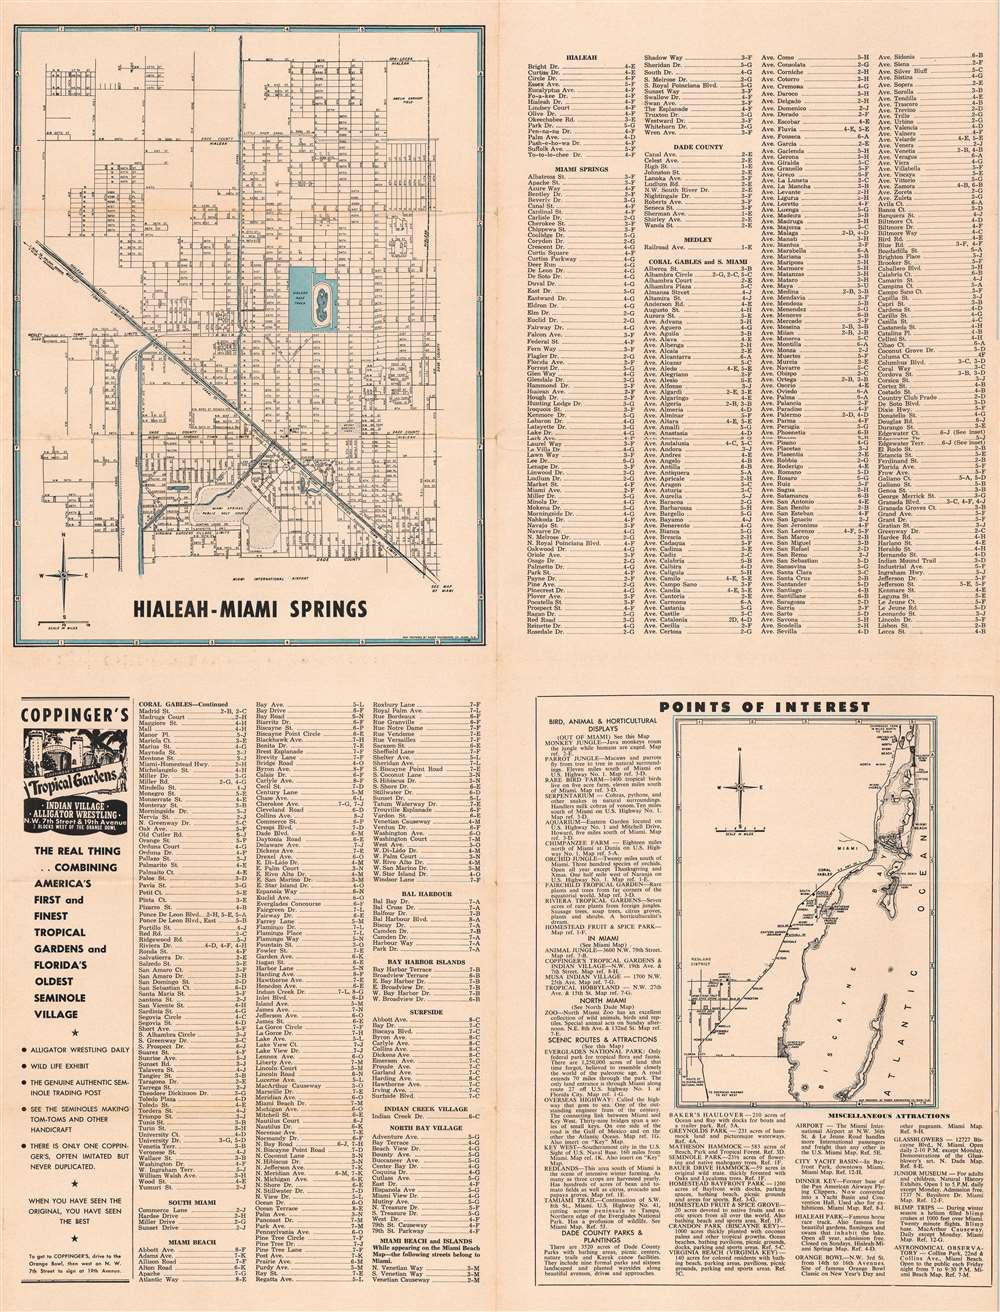 Miami Beach and Islands. / Coral Gables and South Miami. / Hialeah - Miami Springs. / Miami and El Portal. / North Dade County. / Greater Miami - Corporate Community Limits. - Alternate View 4